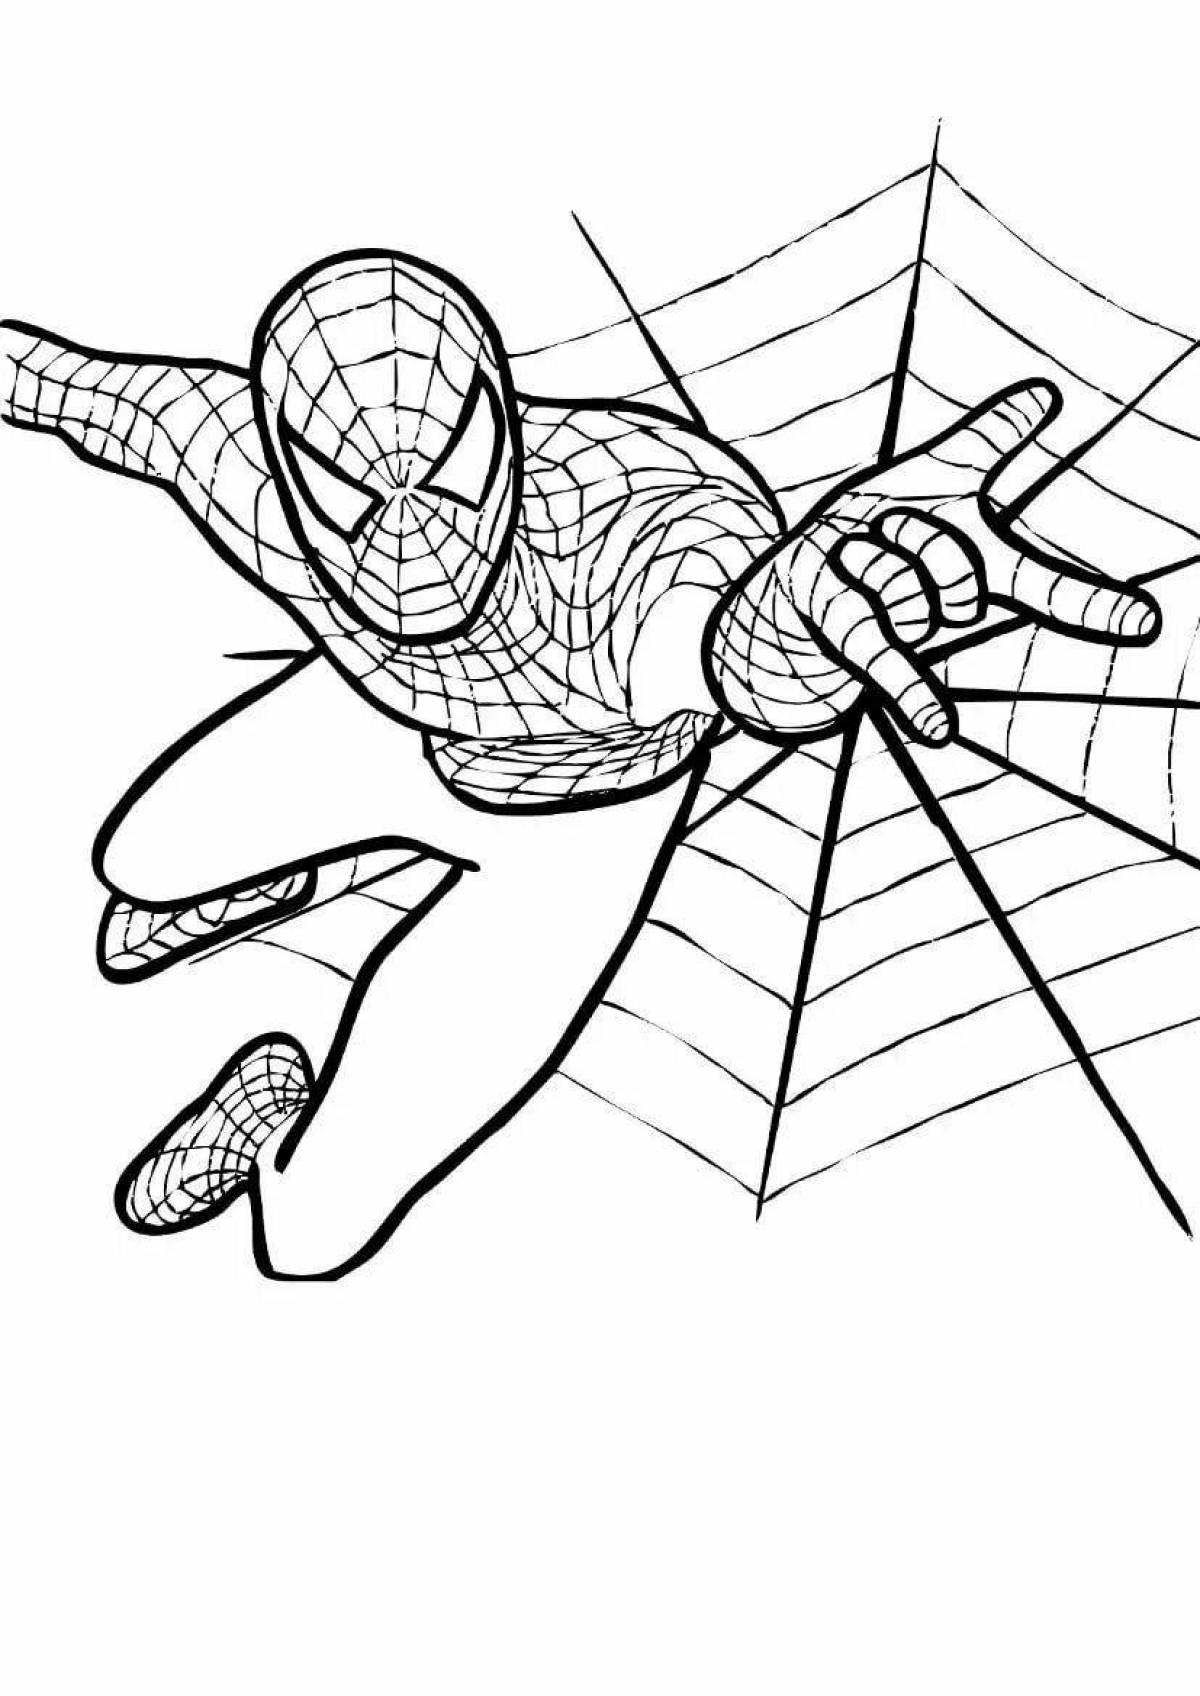 Joyful spiderman coloring pages for kids